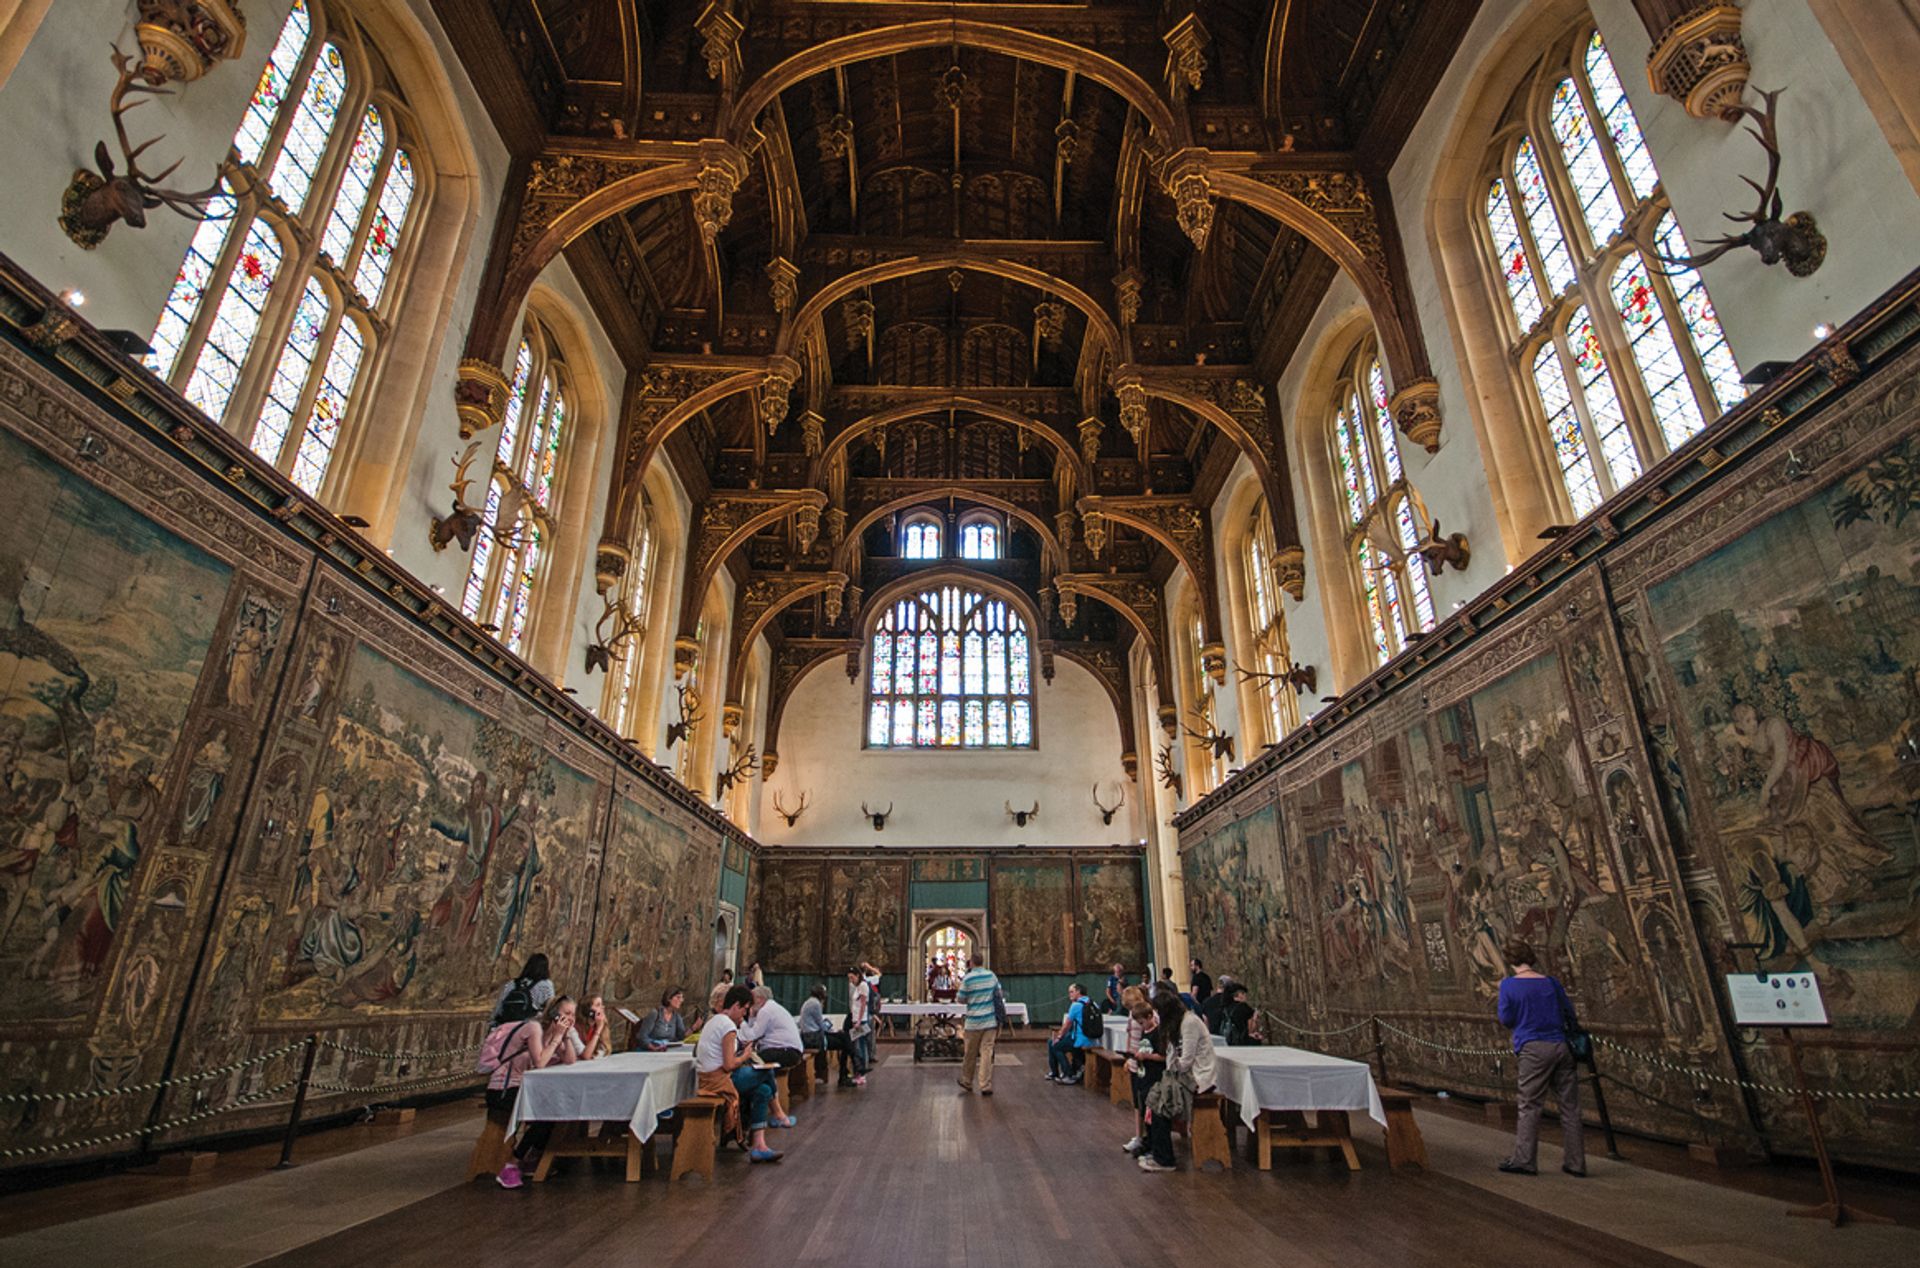 The ten-piece tapestry set of the Story of Abraham at the Great Hall, Hampton Court  © bvi4092